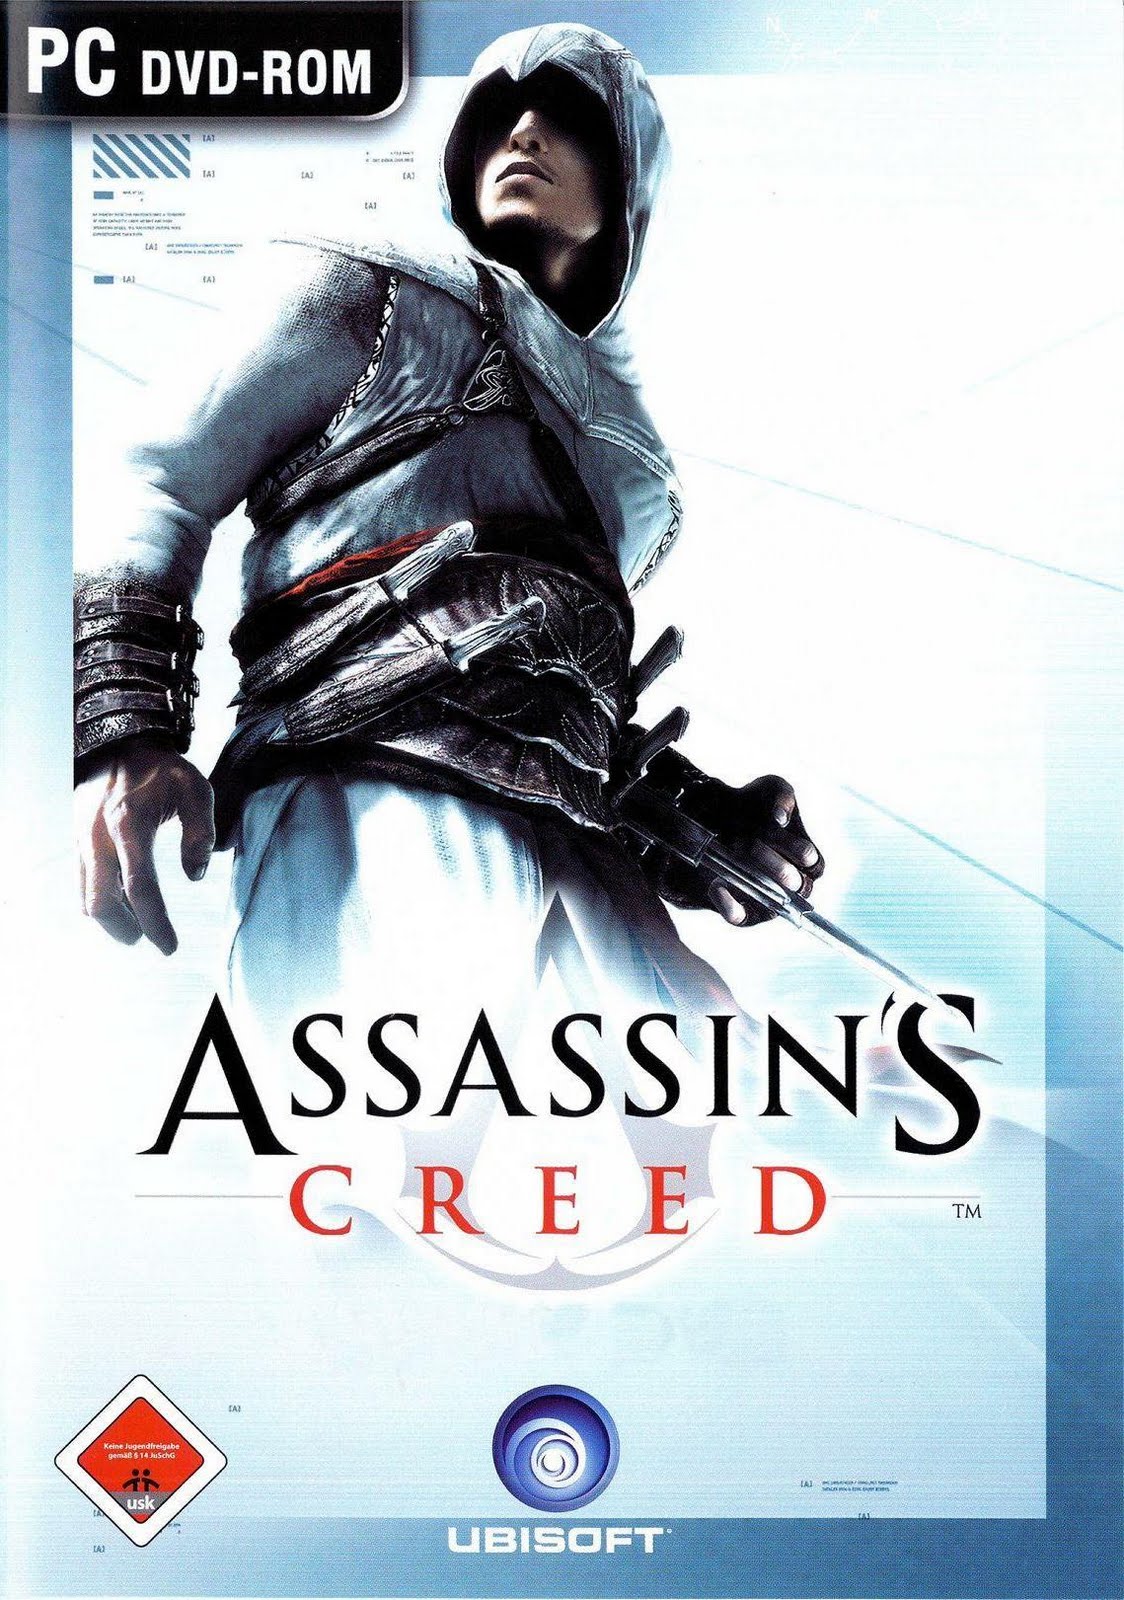 Assassin s 2007. Assassin's Creed 1 обложка. Ассасин Крид 1 диск. Ассасин 1 игра. Assassin's Creed 1 обложка игры.